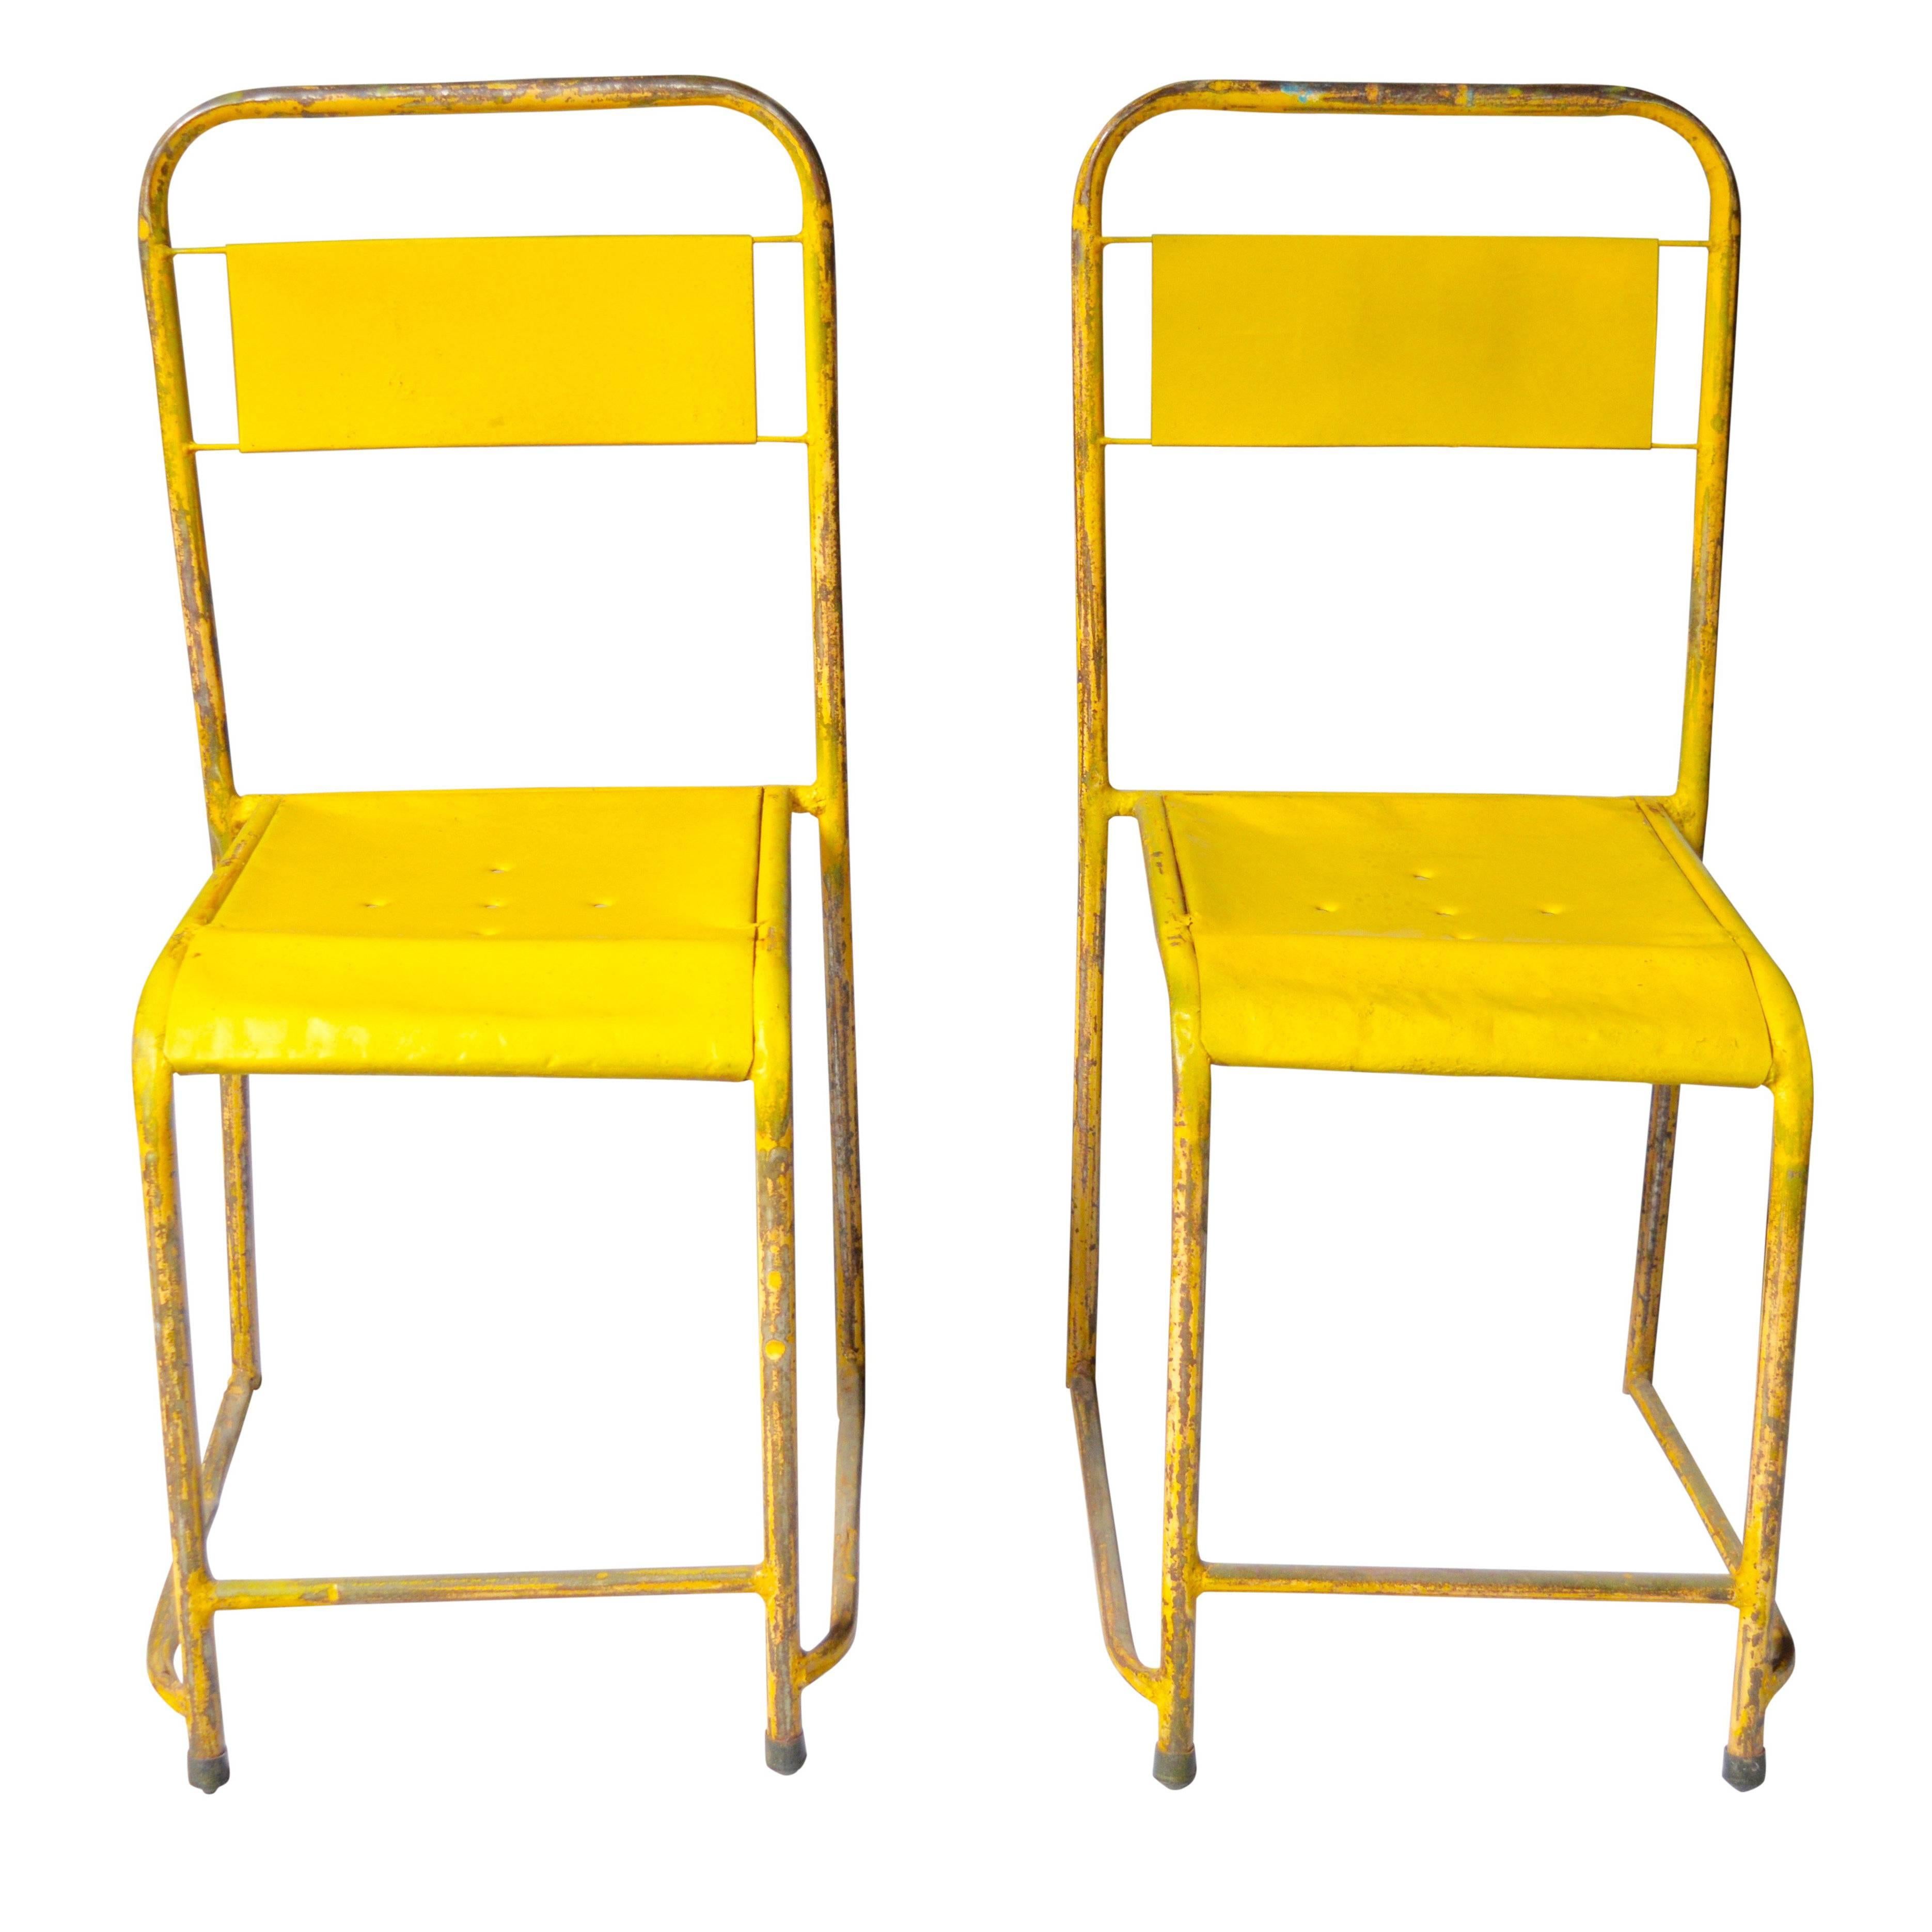 Pair of French School Chairs